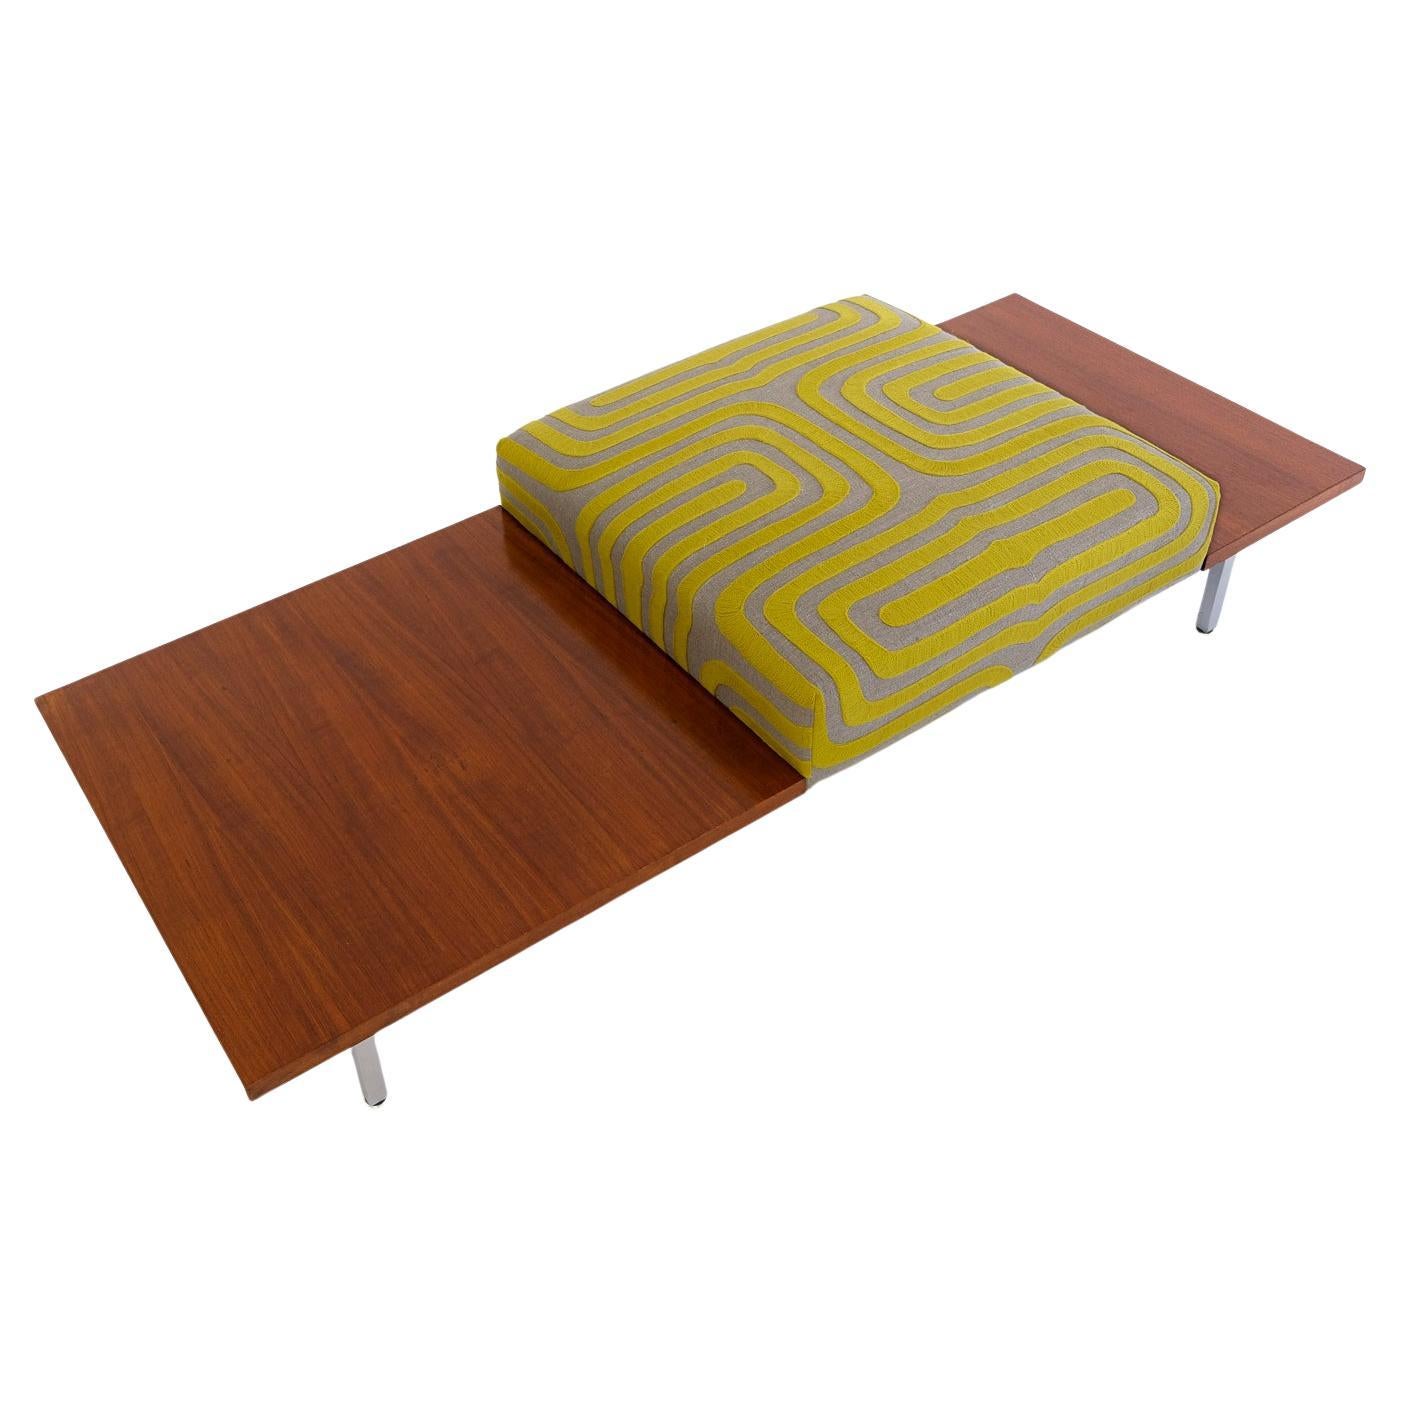 Modular Table Bench by George Nelson for Herman Miller with Pierre Frey cushion For Sale